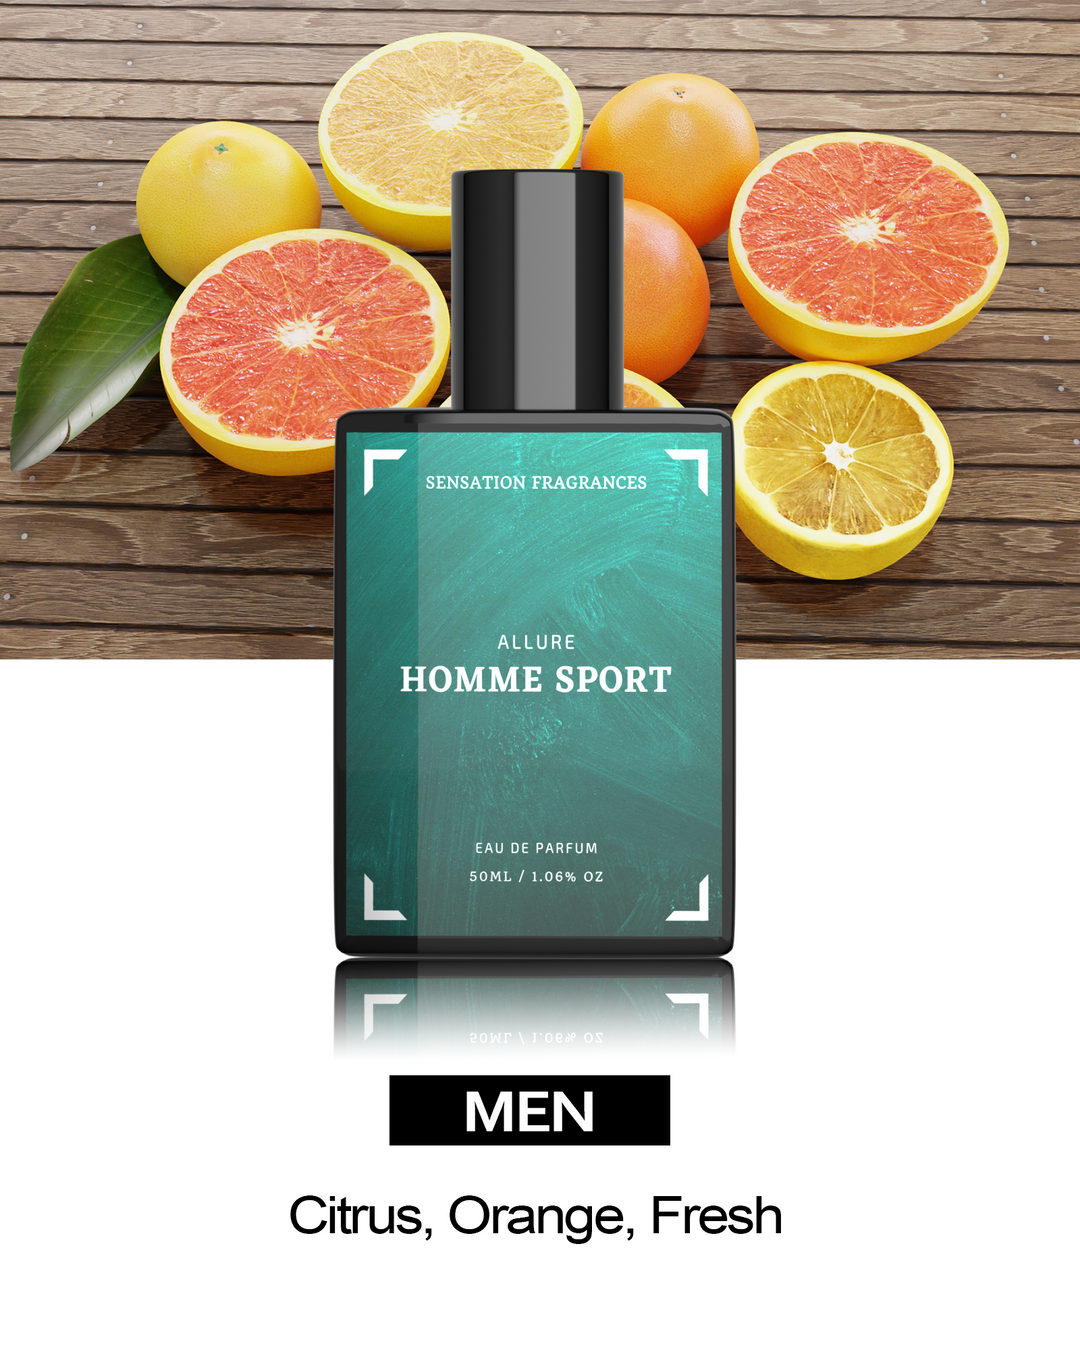 Our Impression of - ALLURE Homme Sport